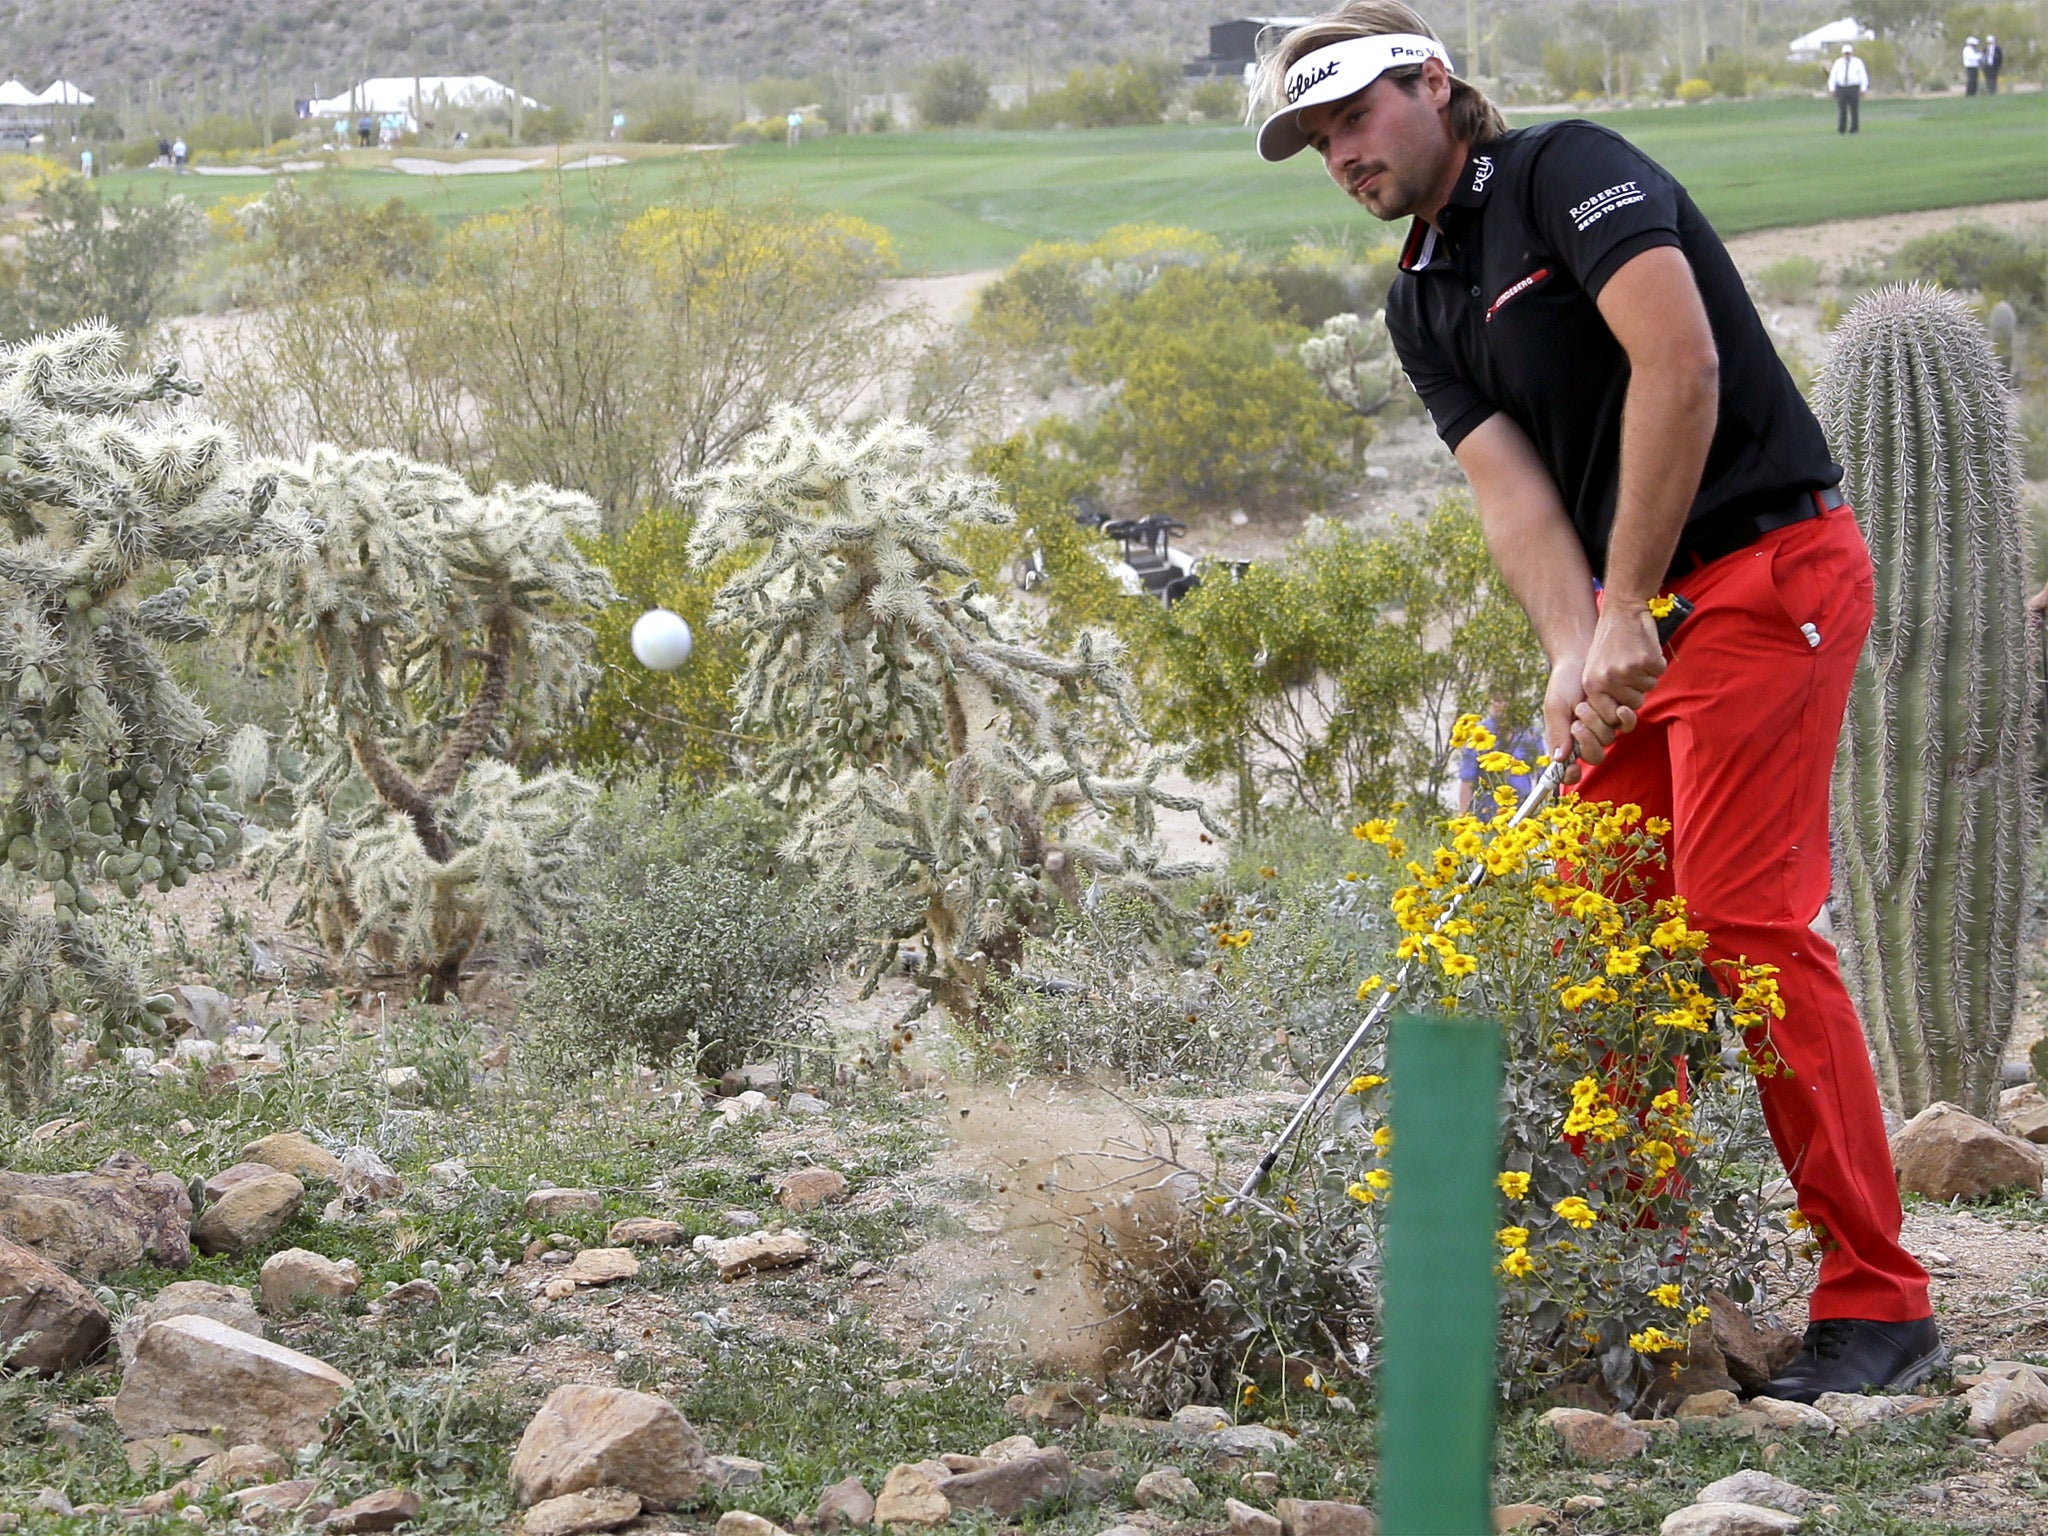 Victor Dubuisson pulls off a spectacular shot from the desert in last month’s World Match Play